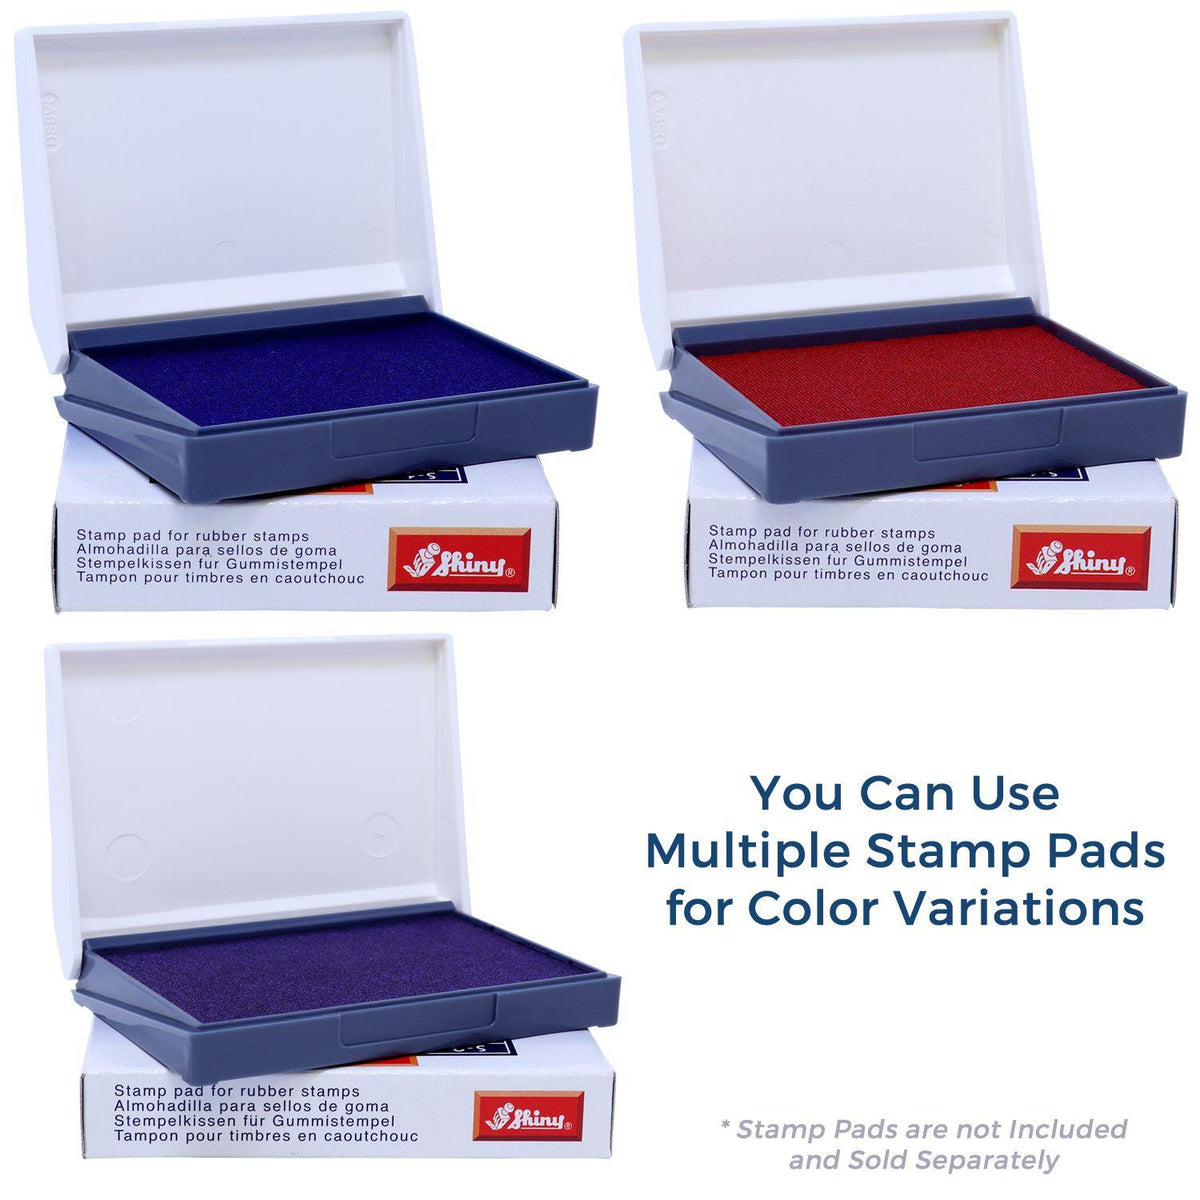 Stamp Pads for Large Copia Rubber Stamp Available